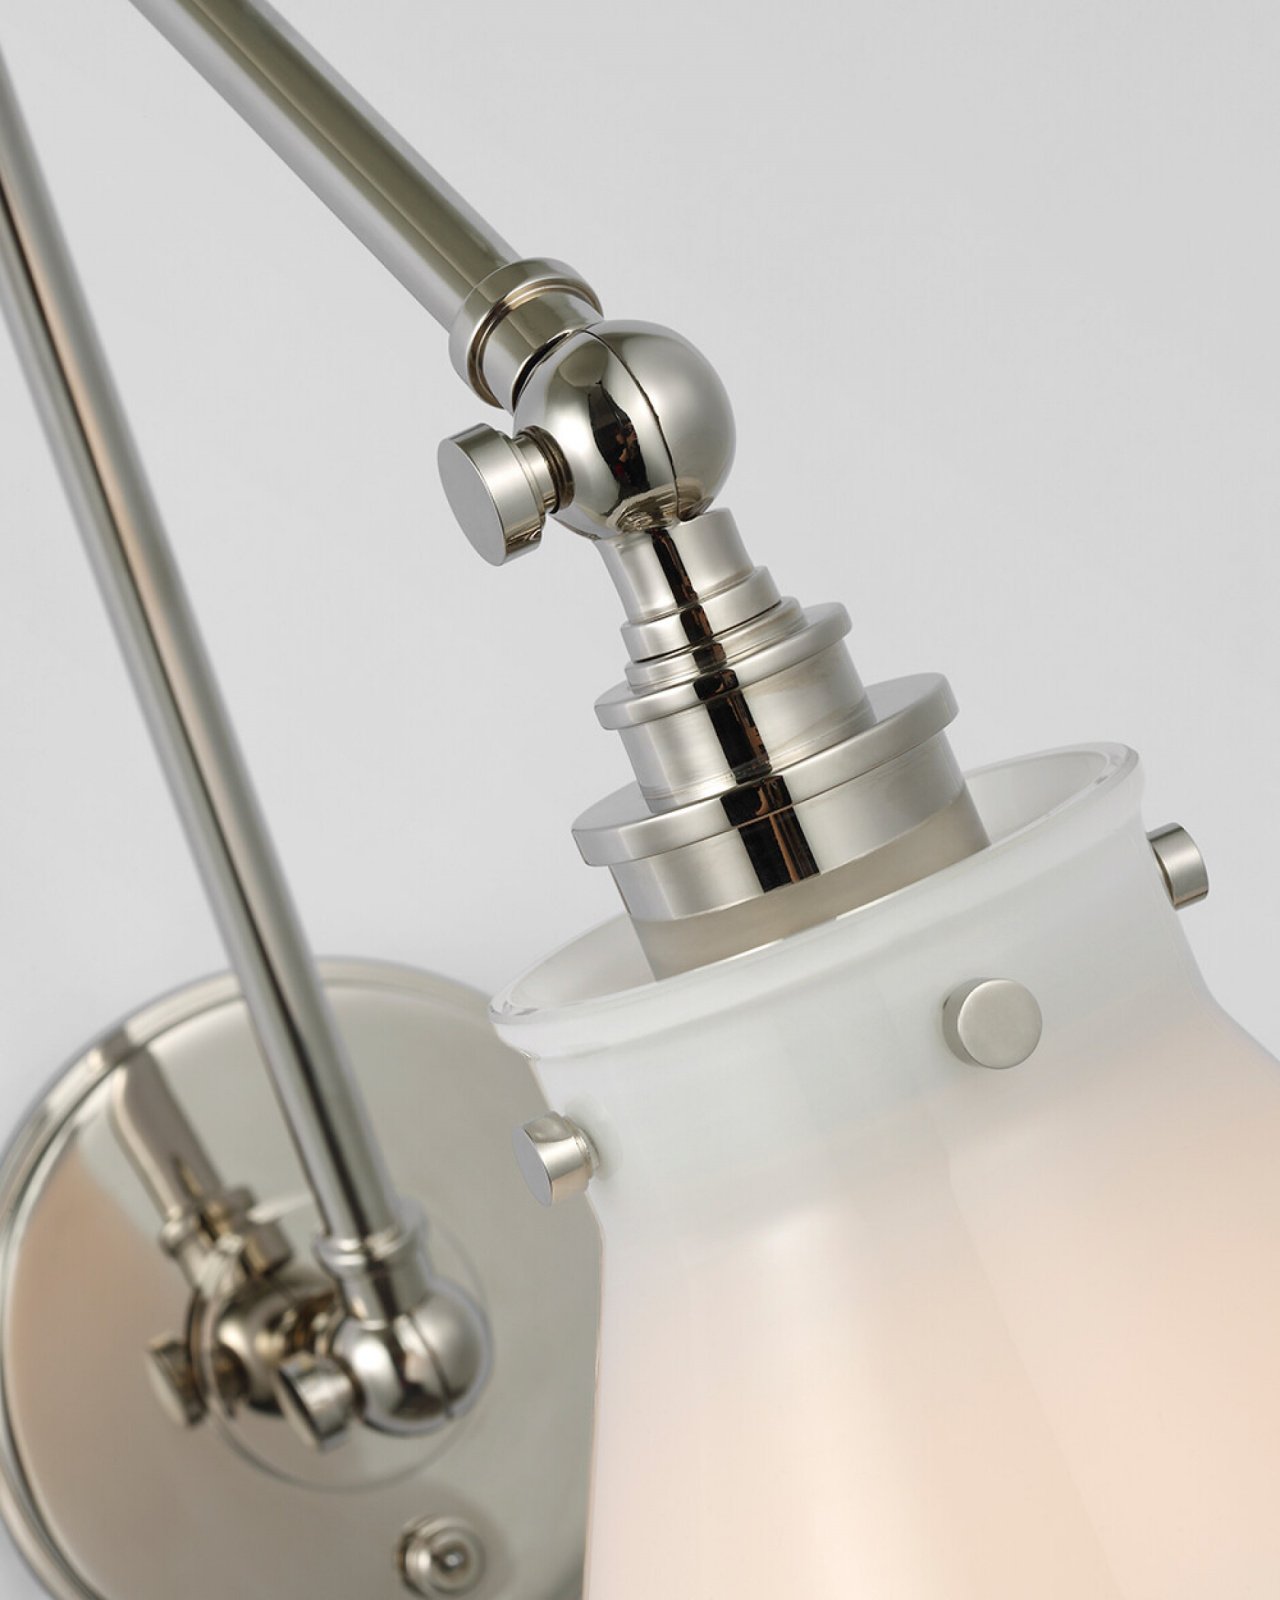 Parkington Double Library Wall Light Polished Nickel/White